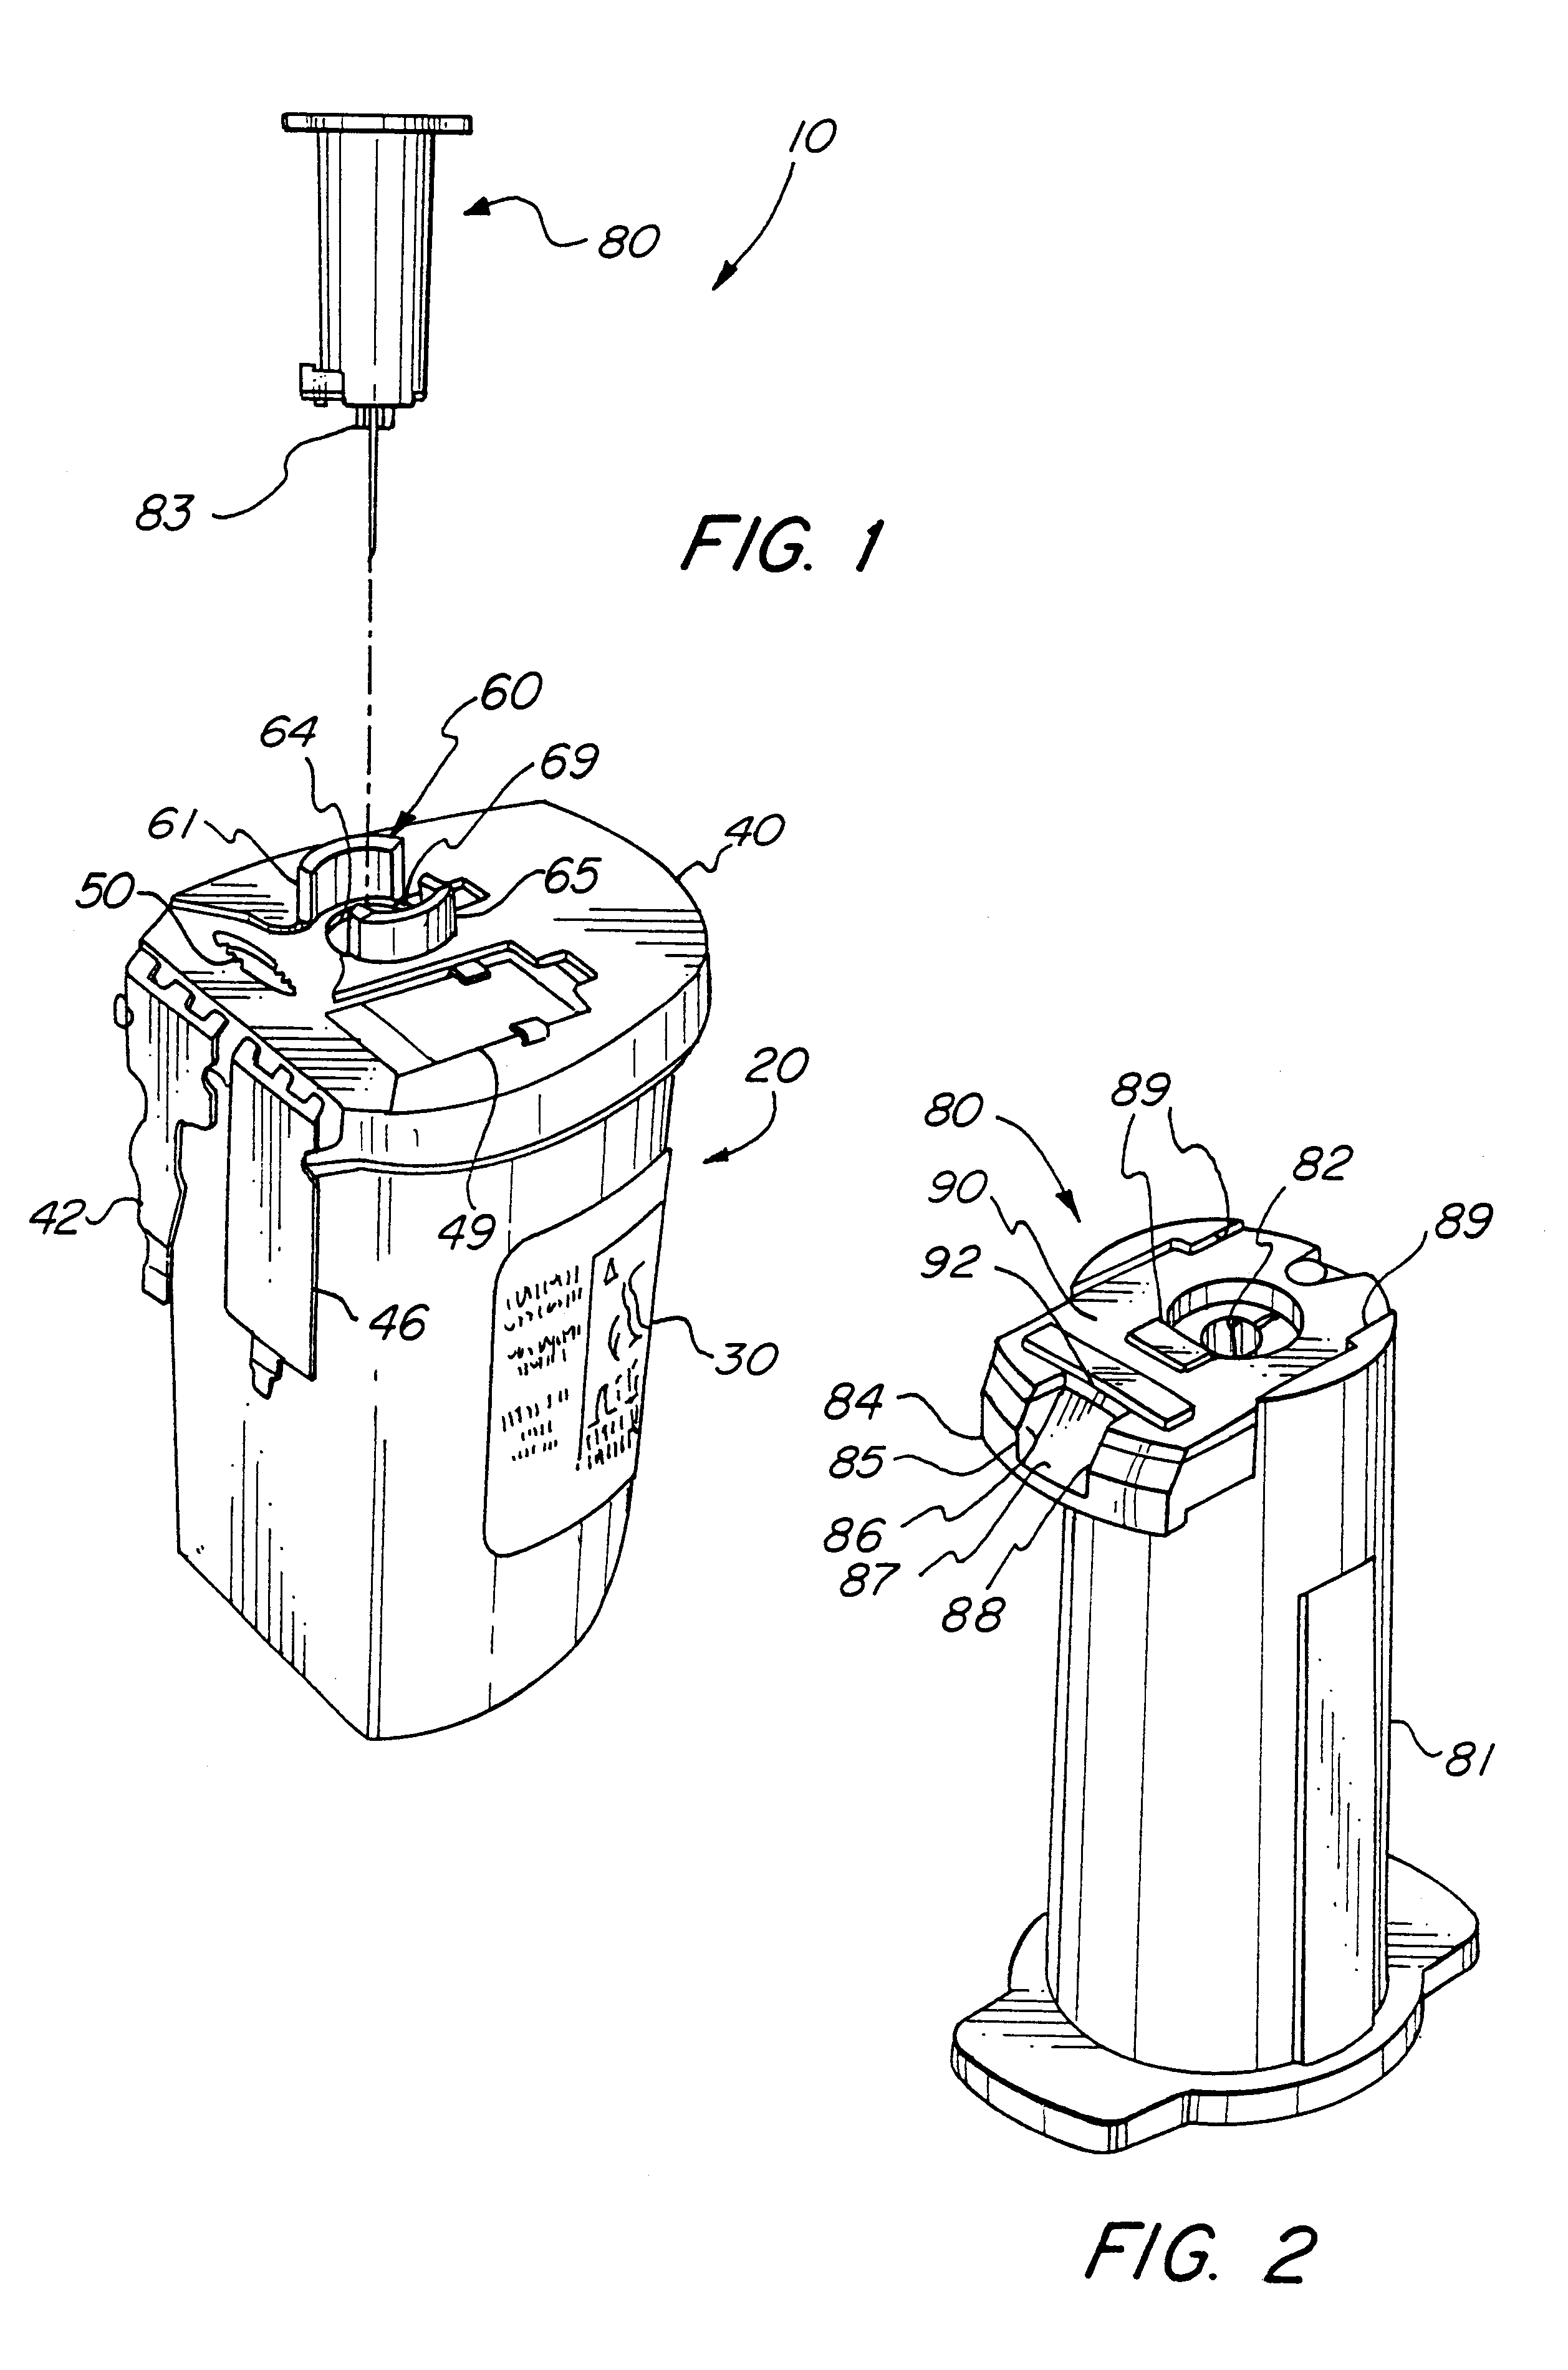 System for disposal of contaminated medical products